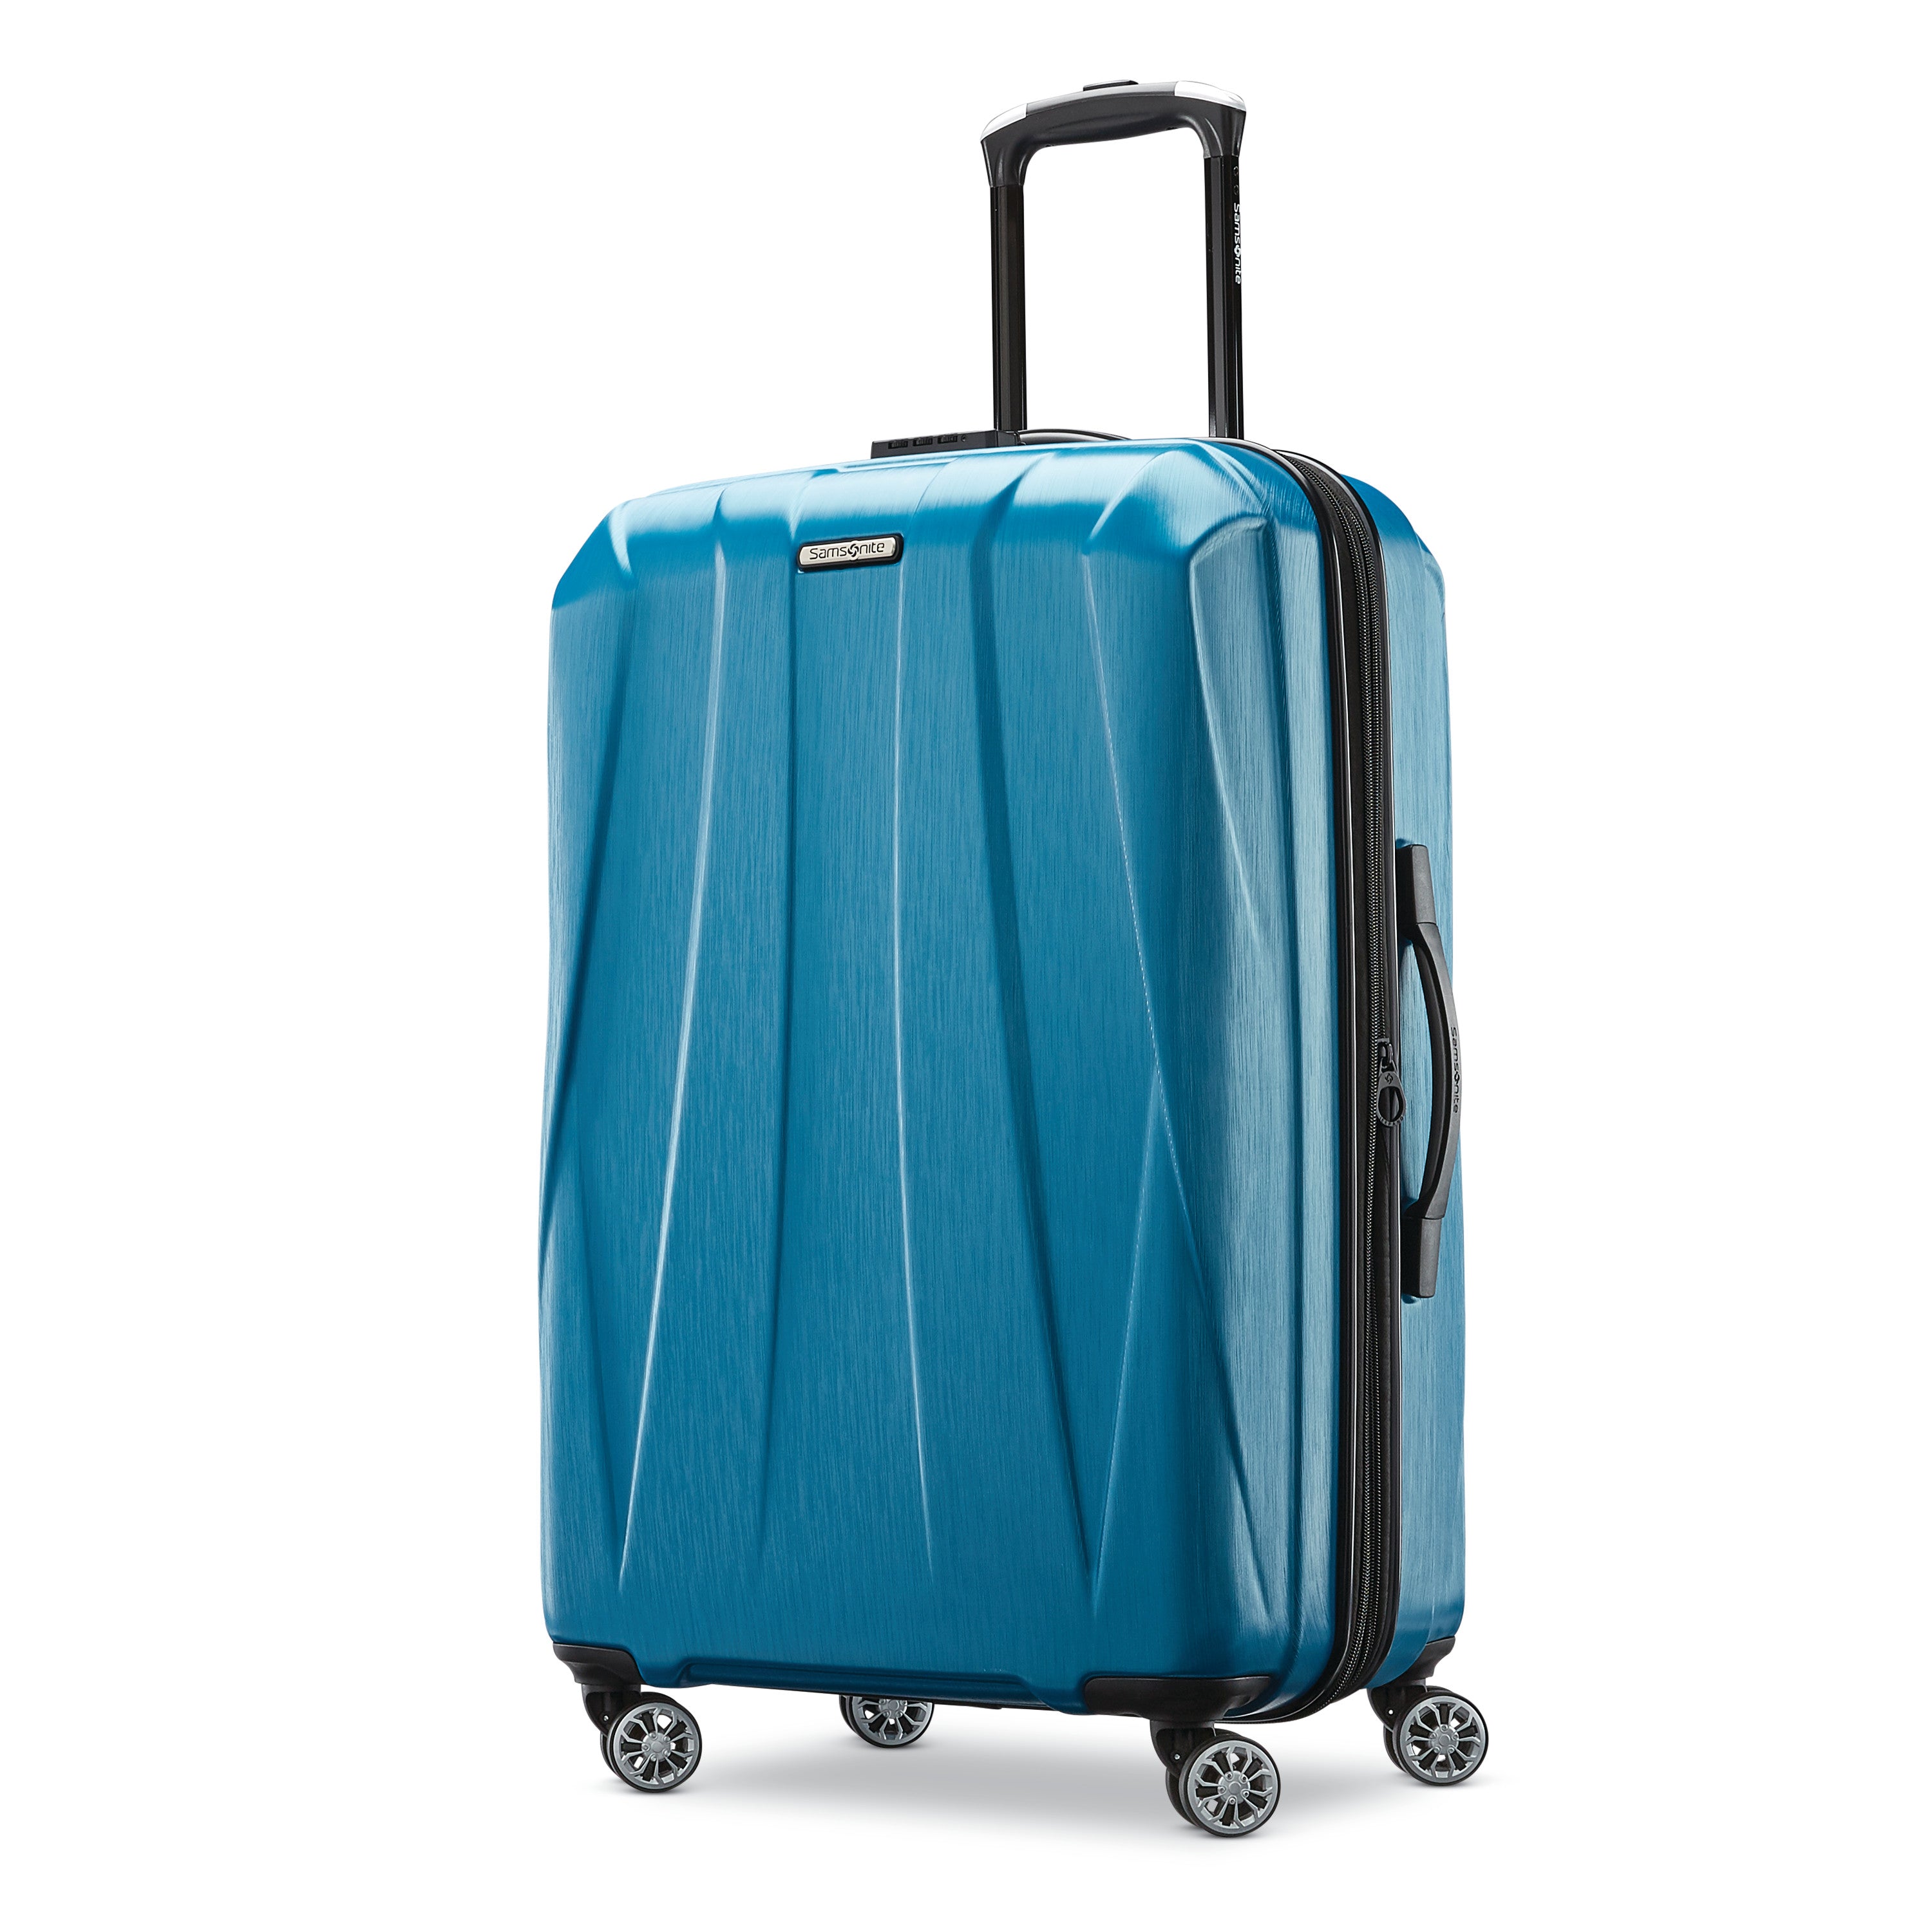 Samsonite Centric 2 Expandable Hardside Luggage with Dual Spinner Whee ...